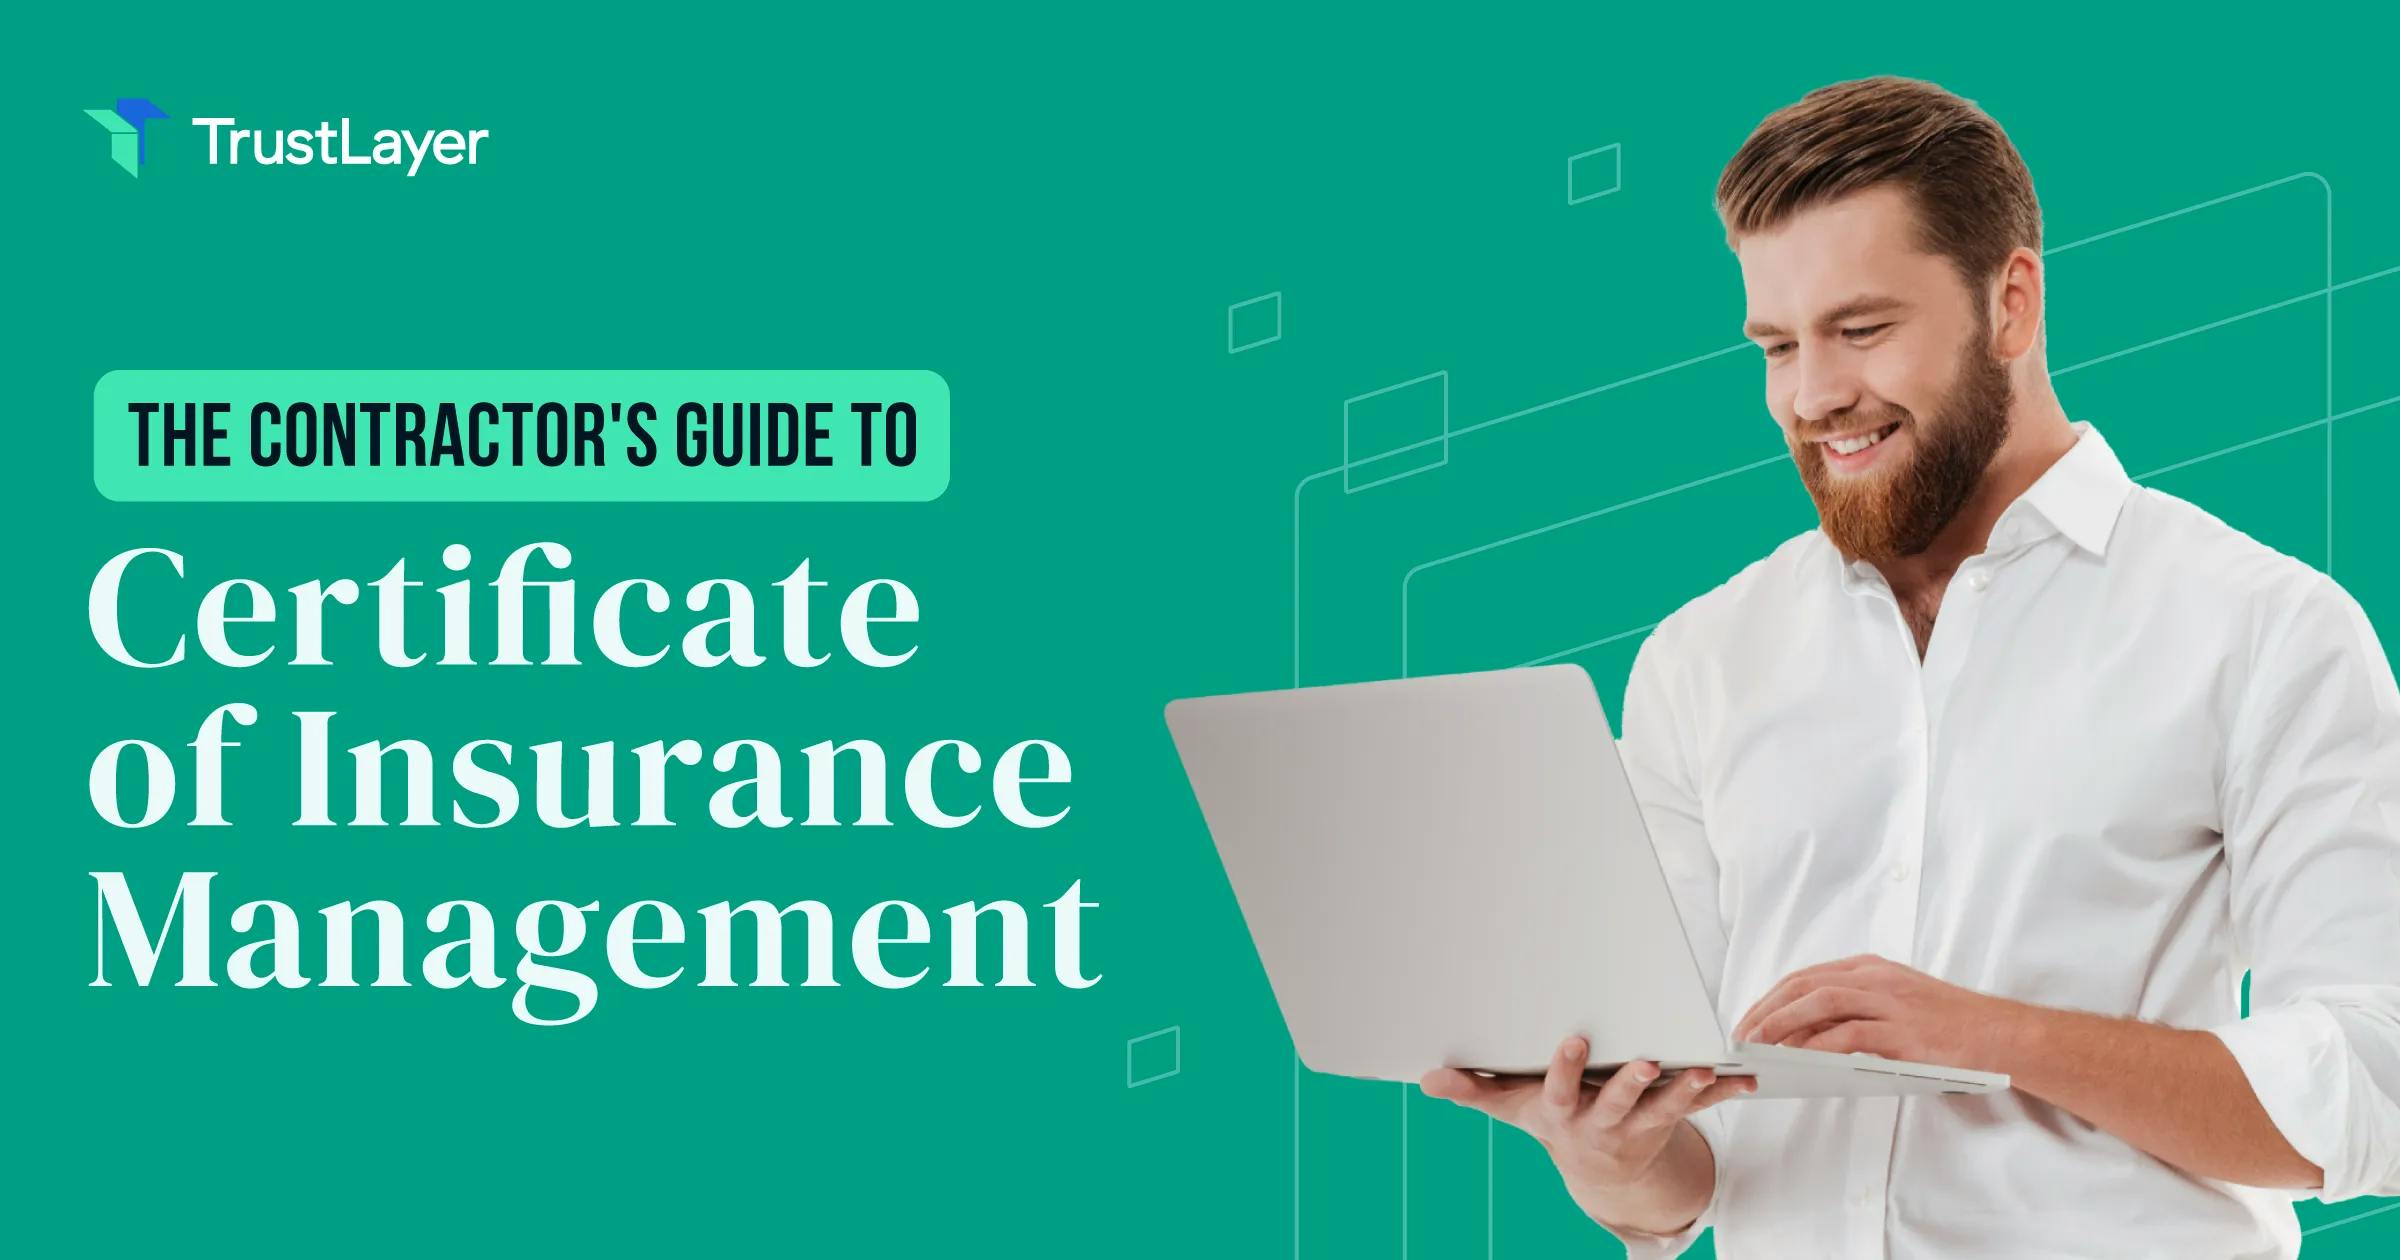 The Contractor's Guide to Certificates of Insurance Management